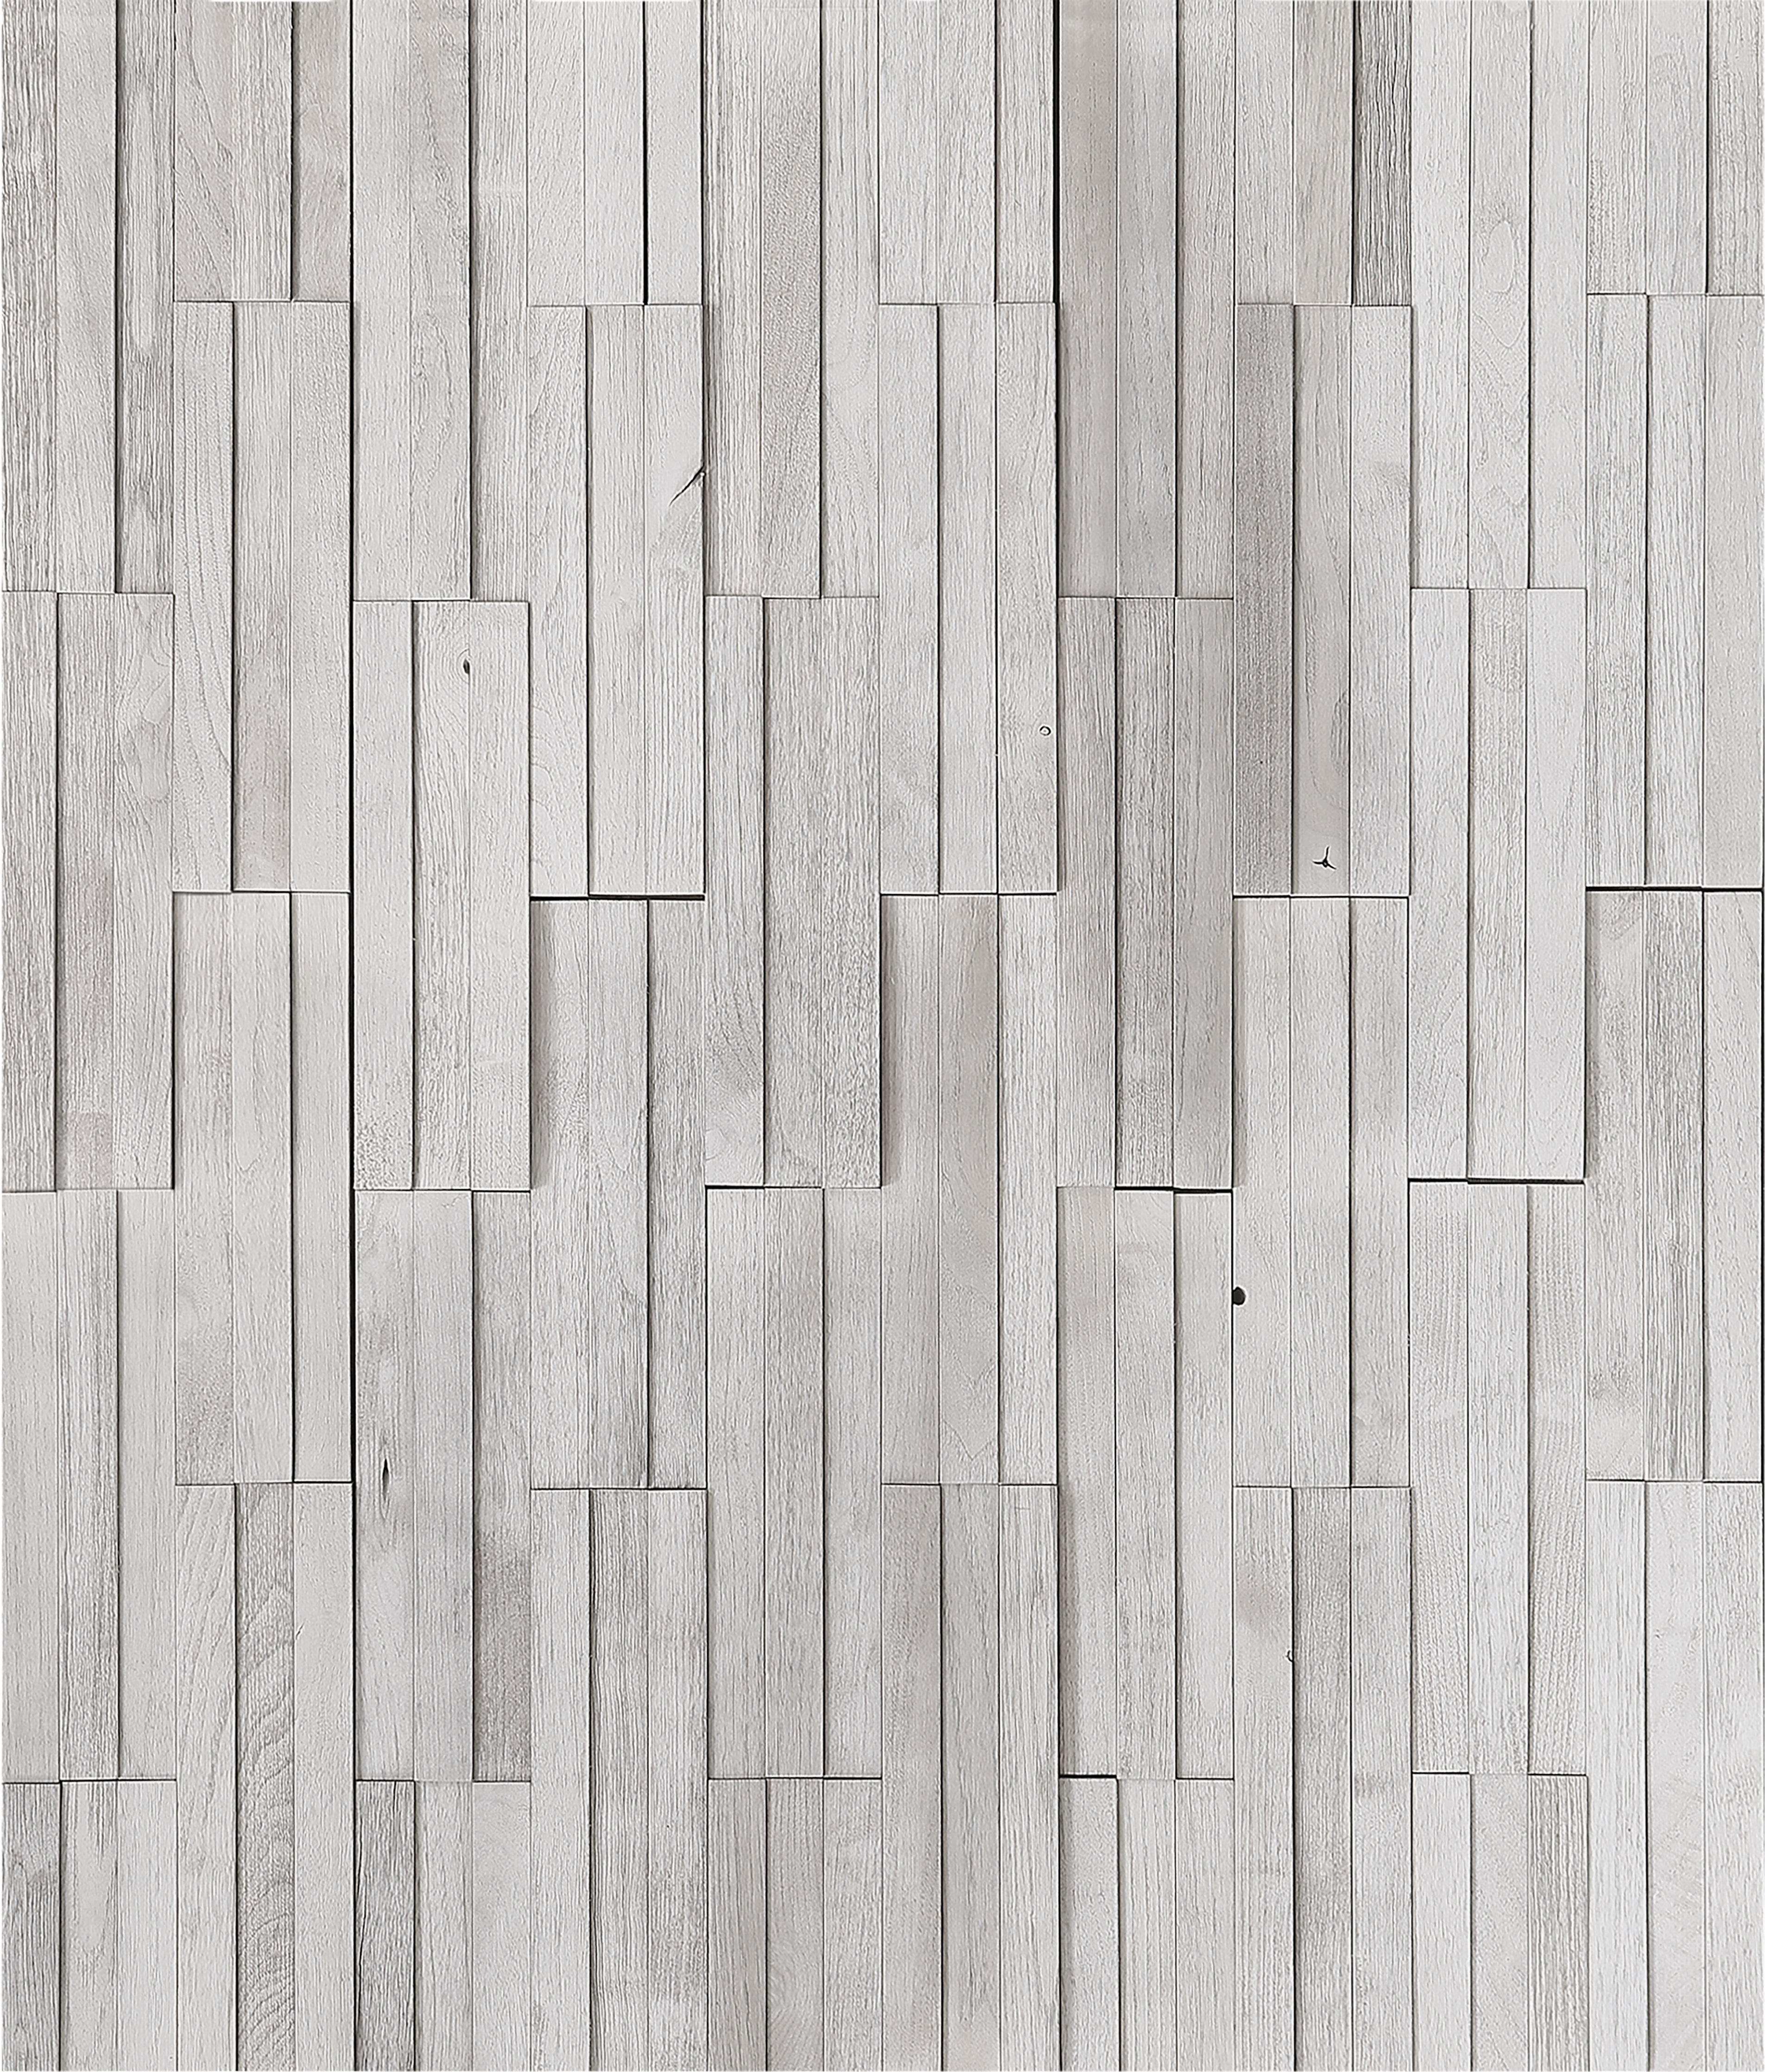 duchateau inceptiv kuadra iceberg oak three dimensional wall natural wood panel lacquer for interior use distributed by surface group international